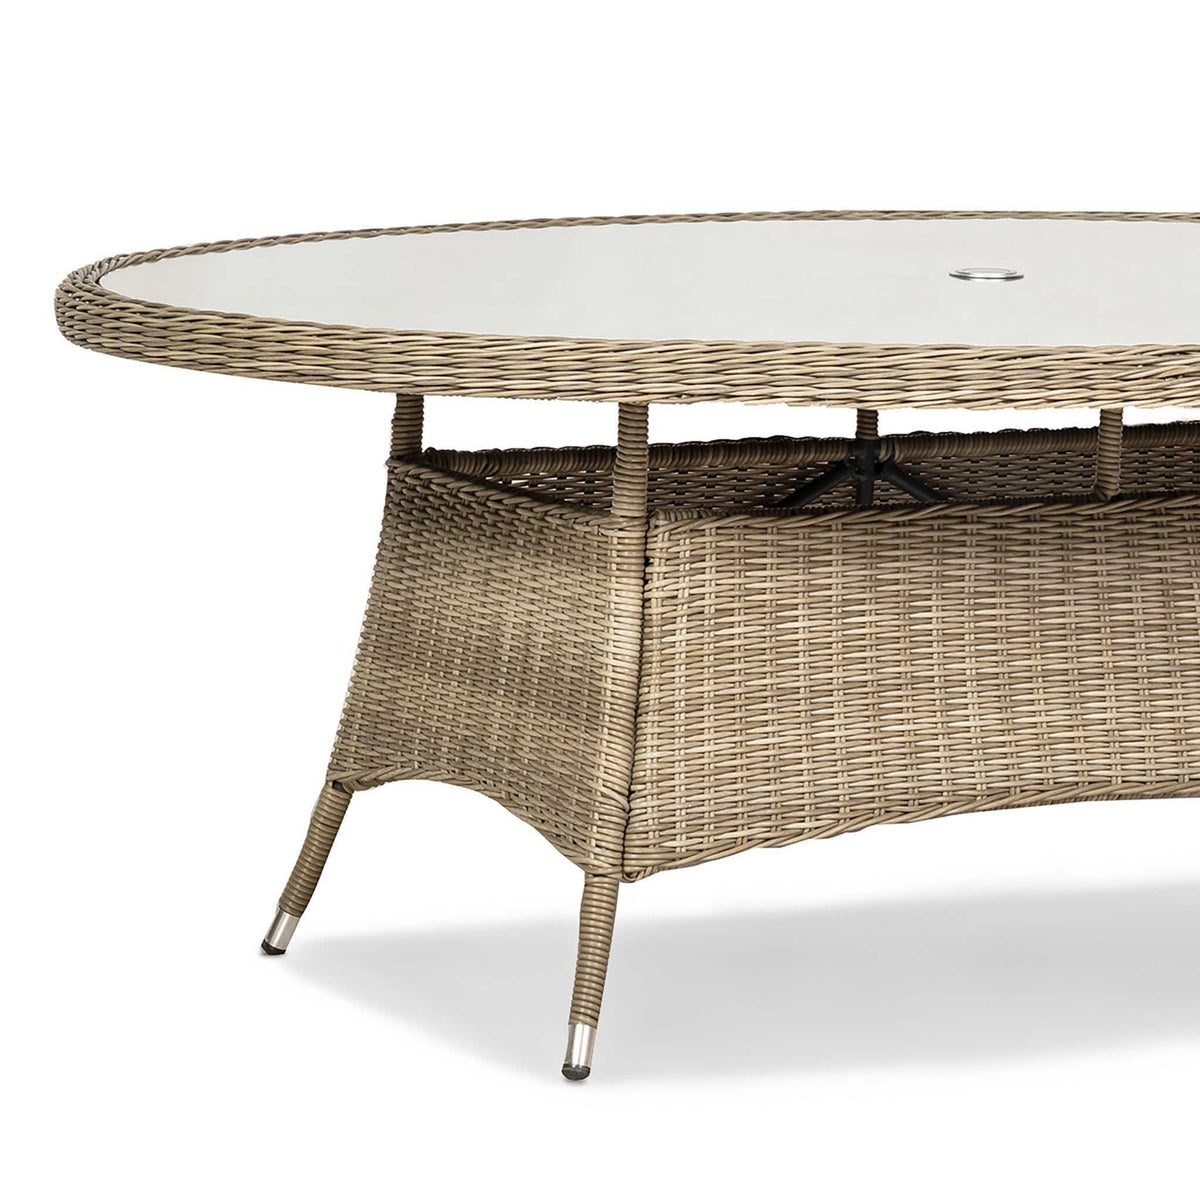 Wentworth 6 Seat Ellipse High-back Rattan Dining Set - Close up of Table